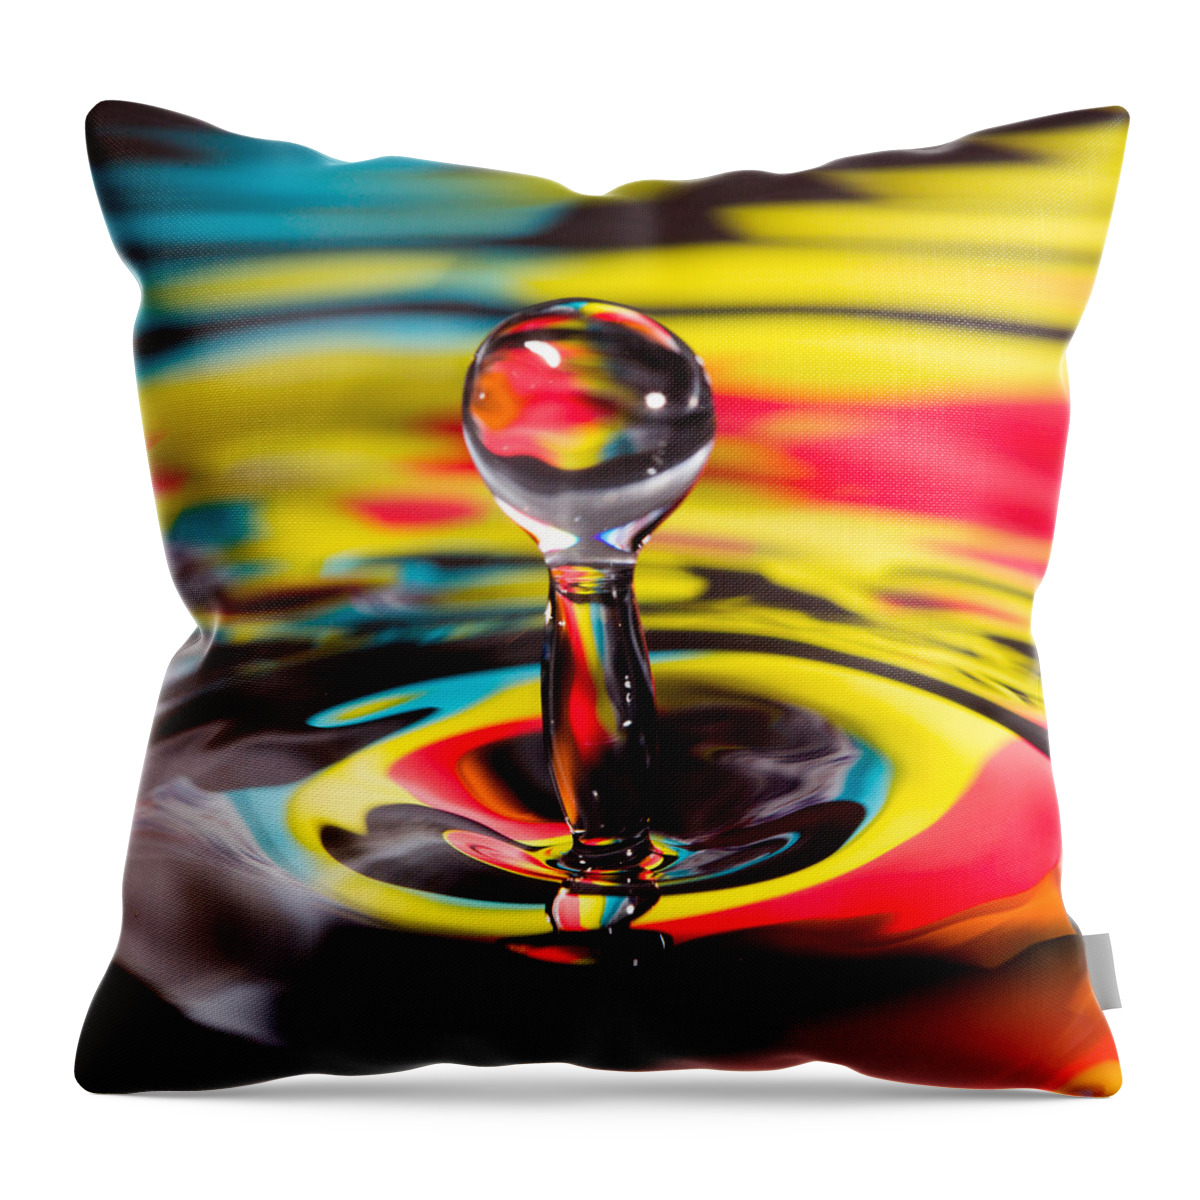 Abstract Throw Pillow featuring the photograph Colorful Water Drop Yellow by SR Green